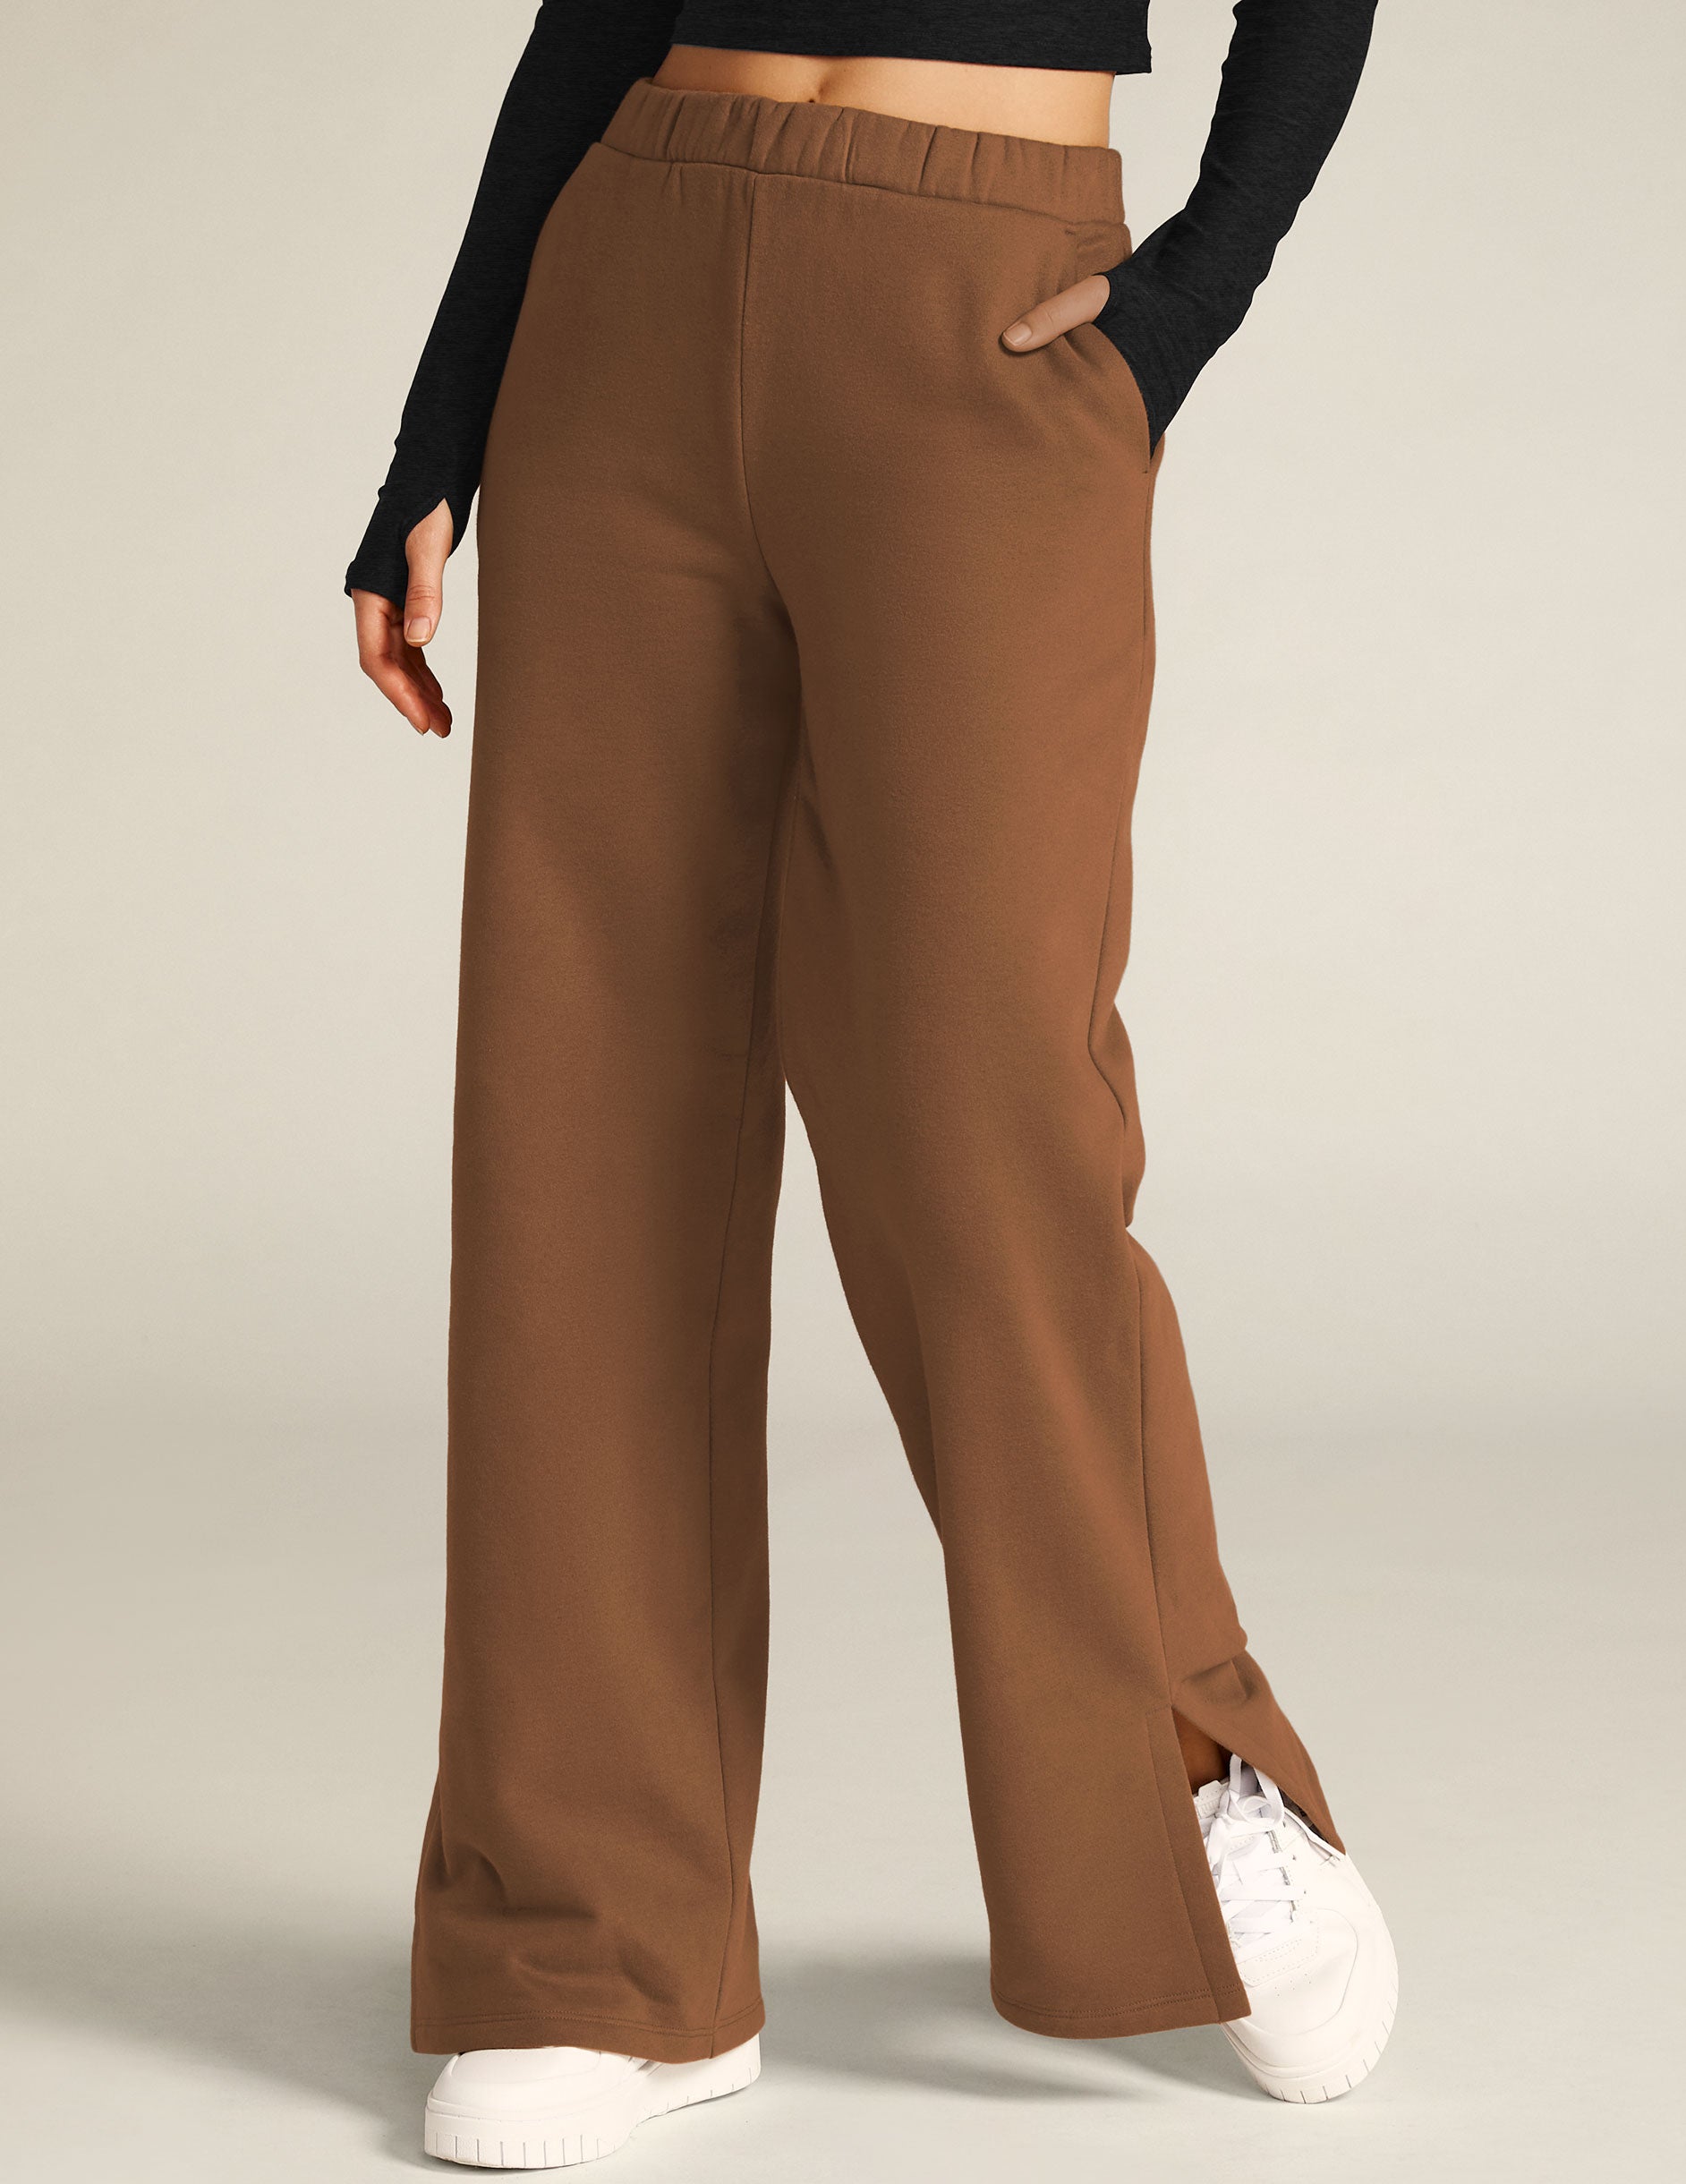 brown pants with side slits by the ankle. 